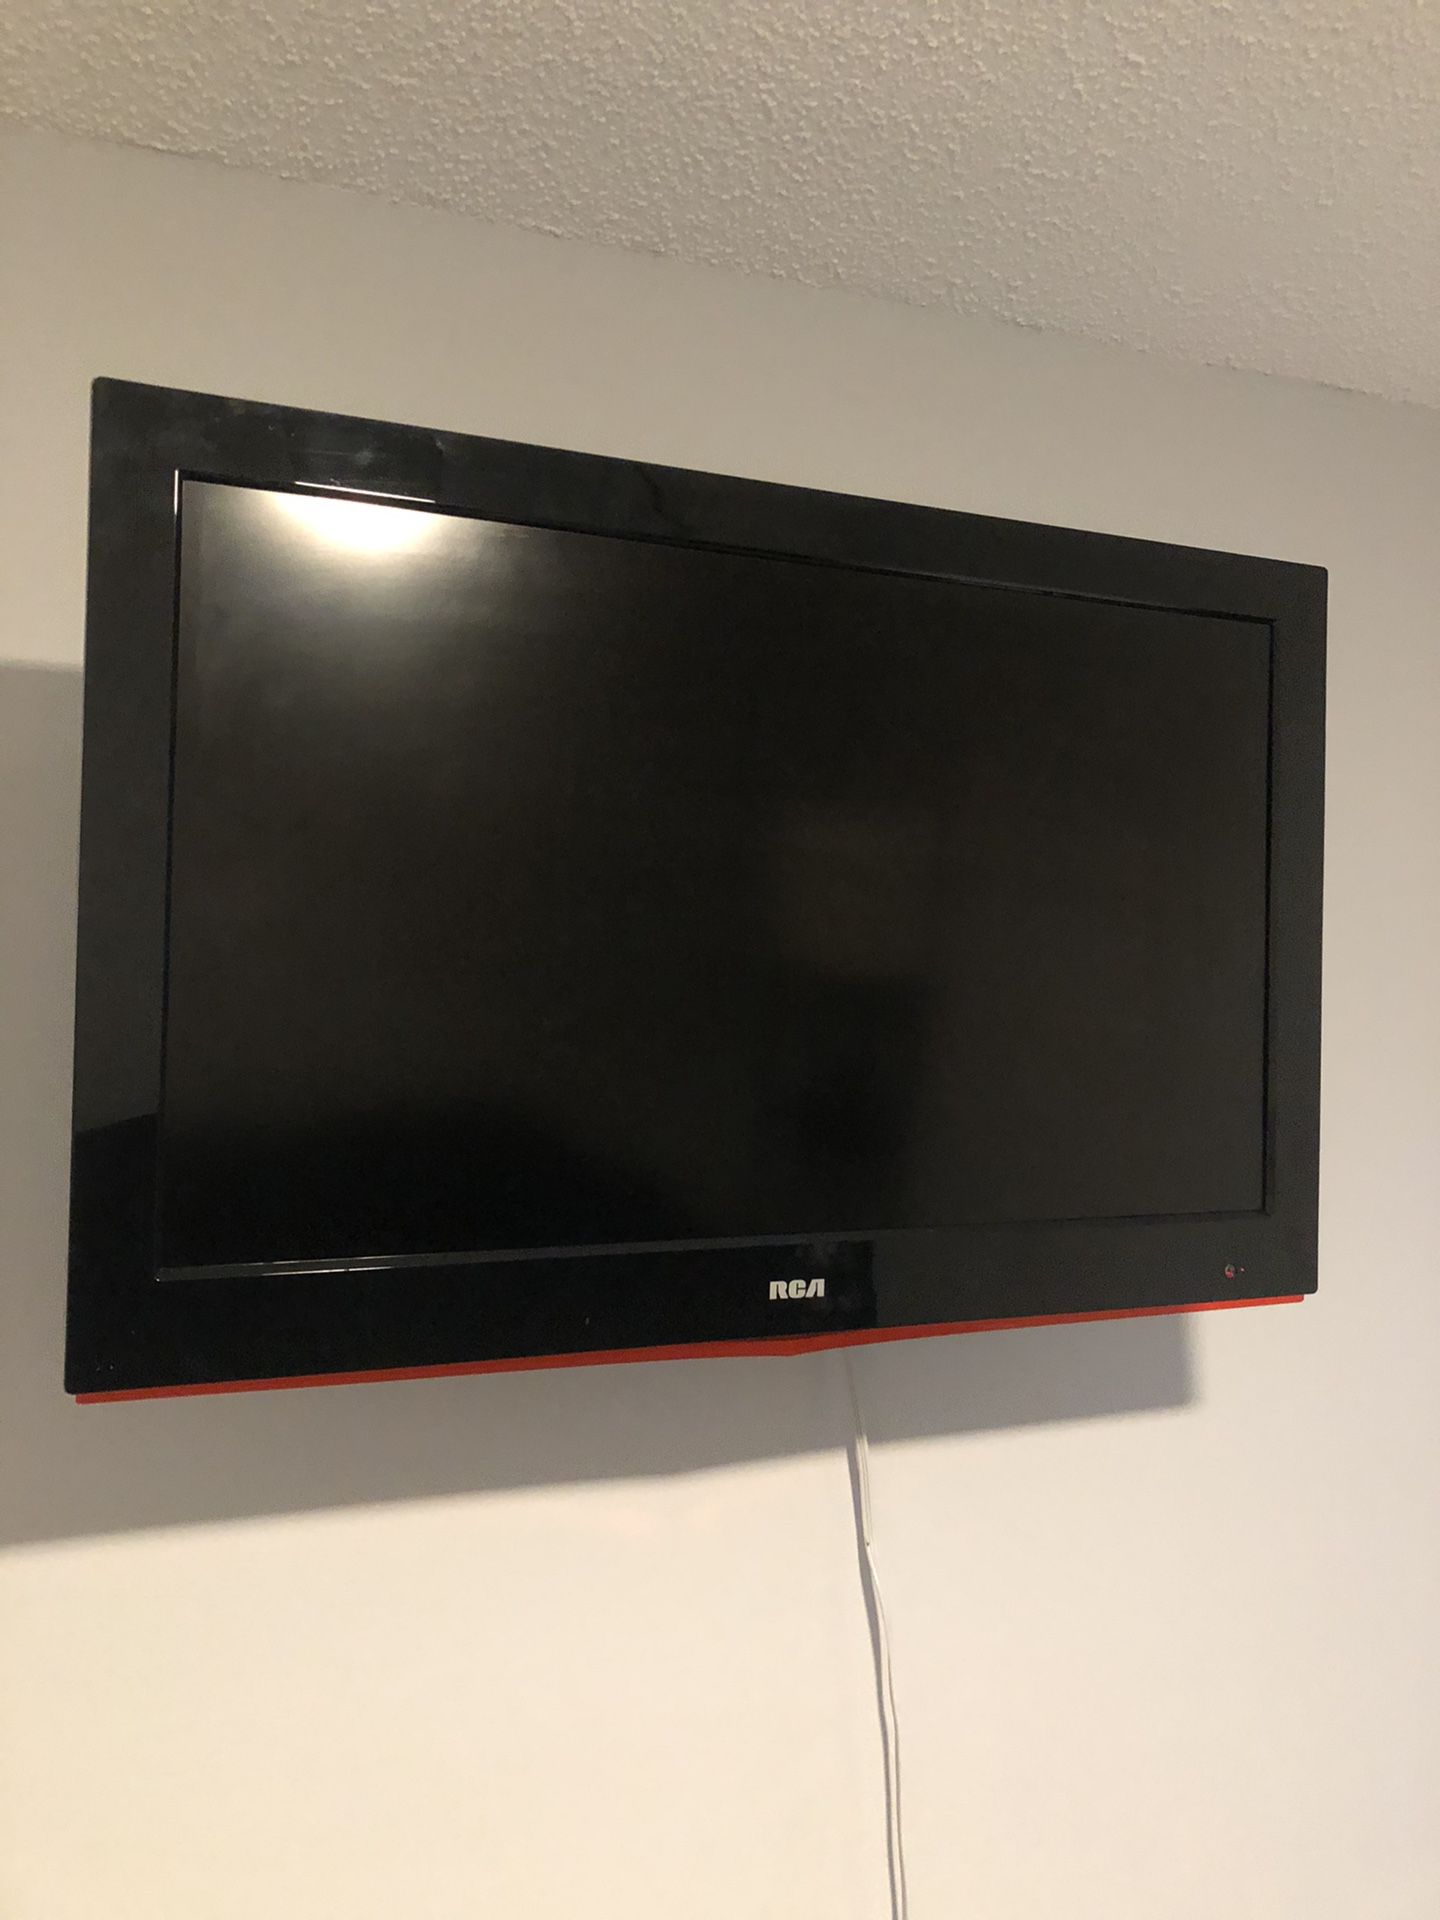 32 inch RCA TV with rotating wall mount.